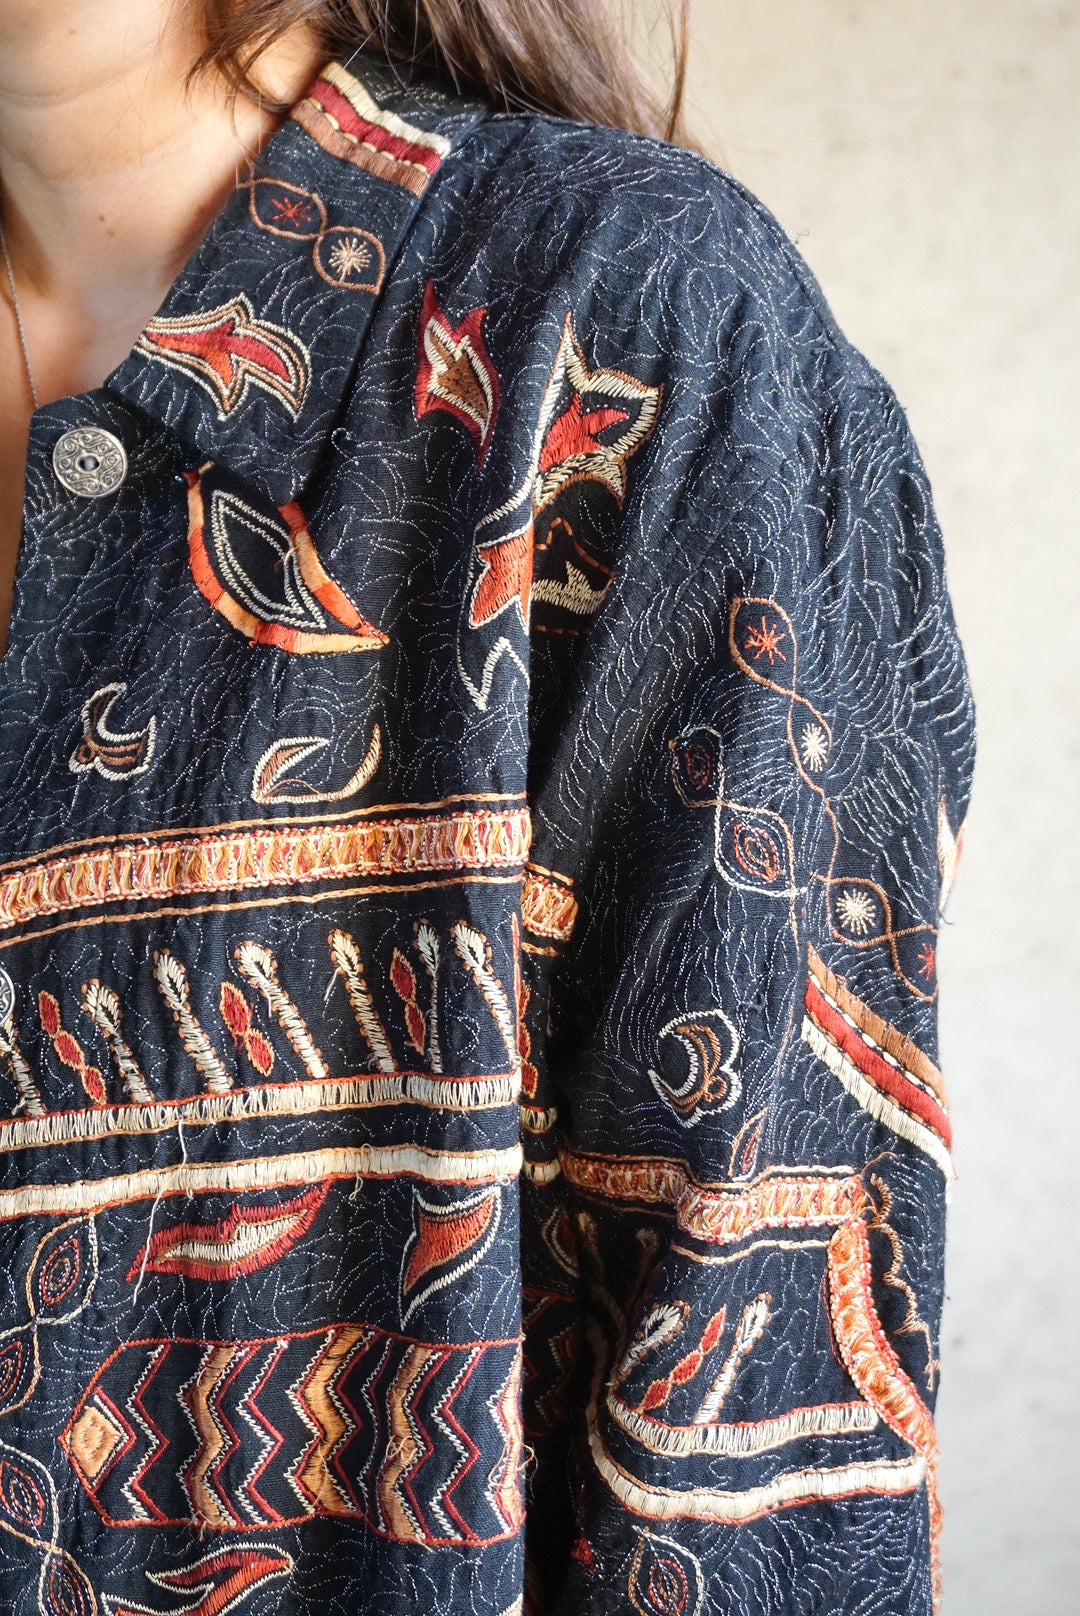 Shine bright - Embroidered jacket - L